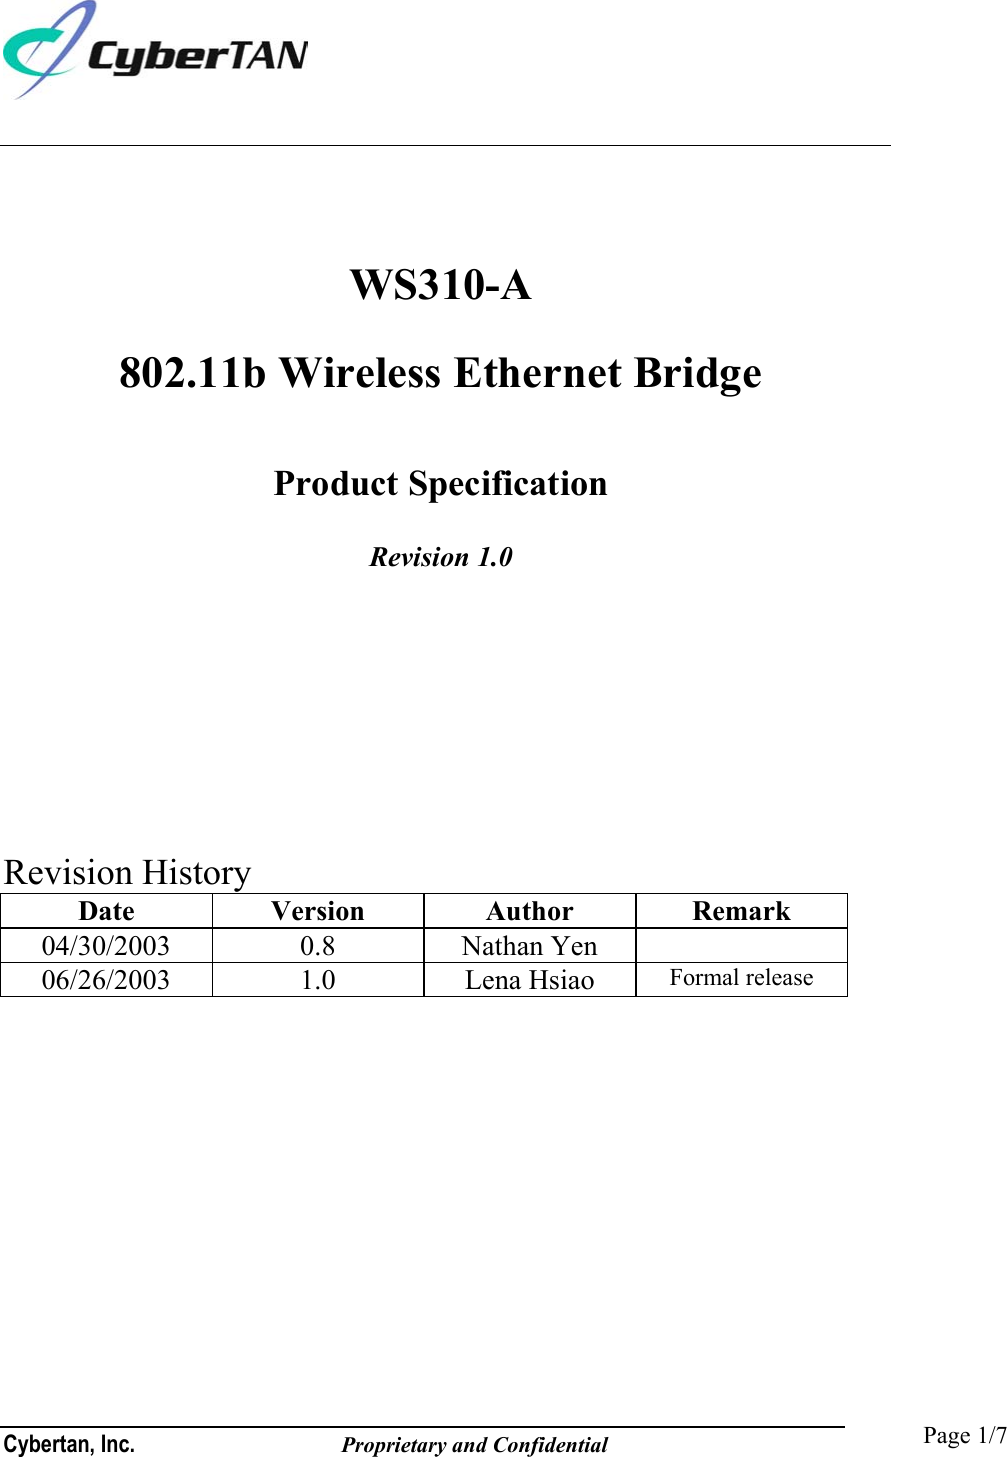  Cybertan, Inc.              Proprietary and Confidential   Page 1/7 WS310-A 802.11b Wireless Ethernet Bridge                          Product Specification Revision 1.0        Revision History Date Version Author Remark 04/30/2003 0.8 Nathan Yen   06/26/2003 1.0 Lena Hsiao Formal release   